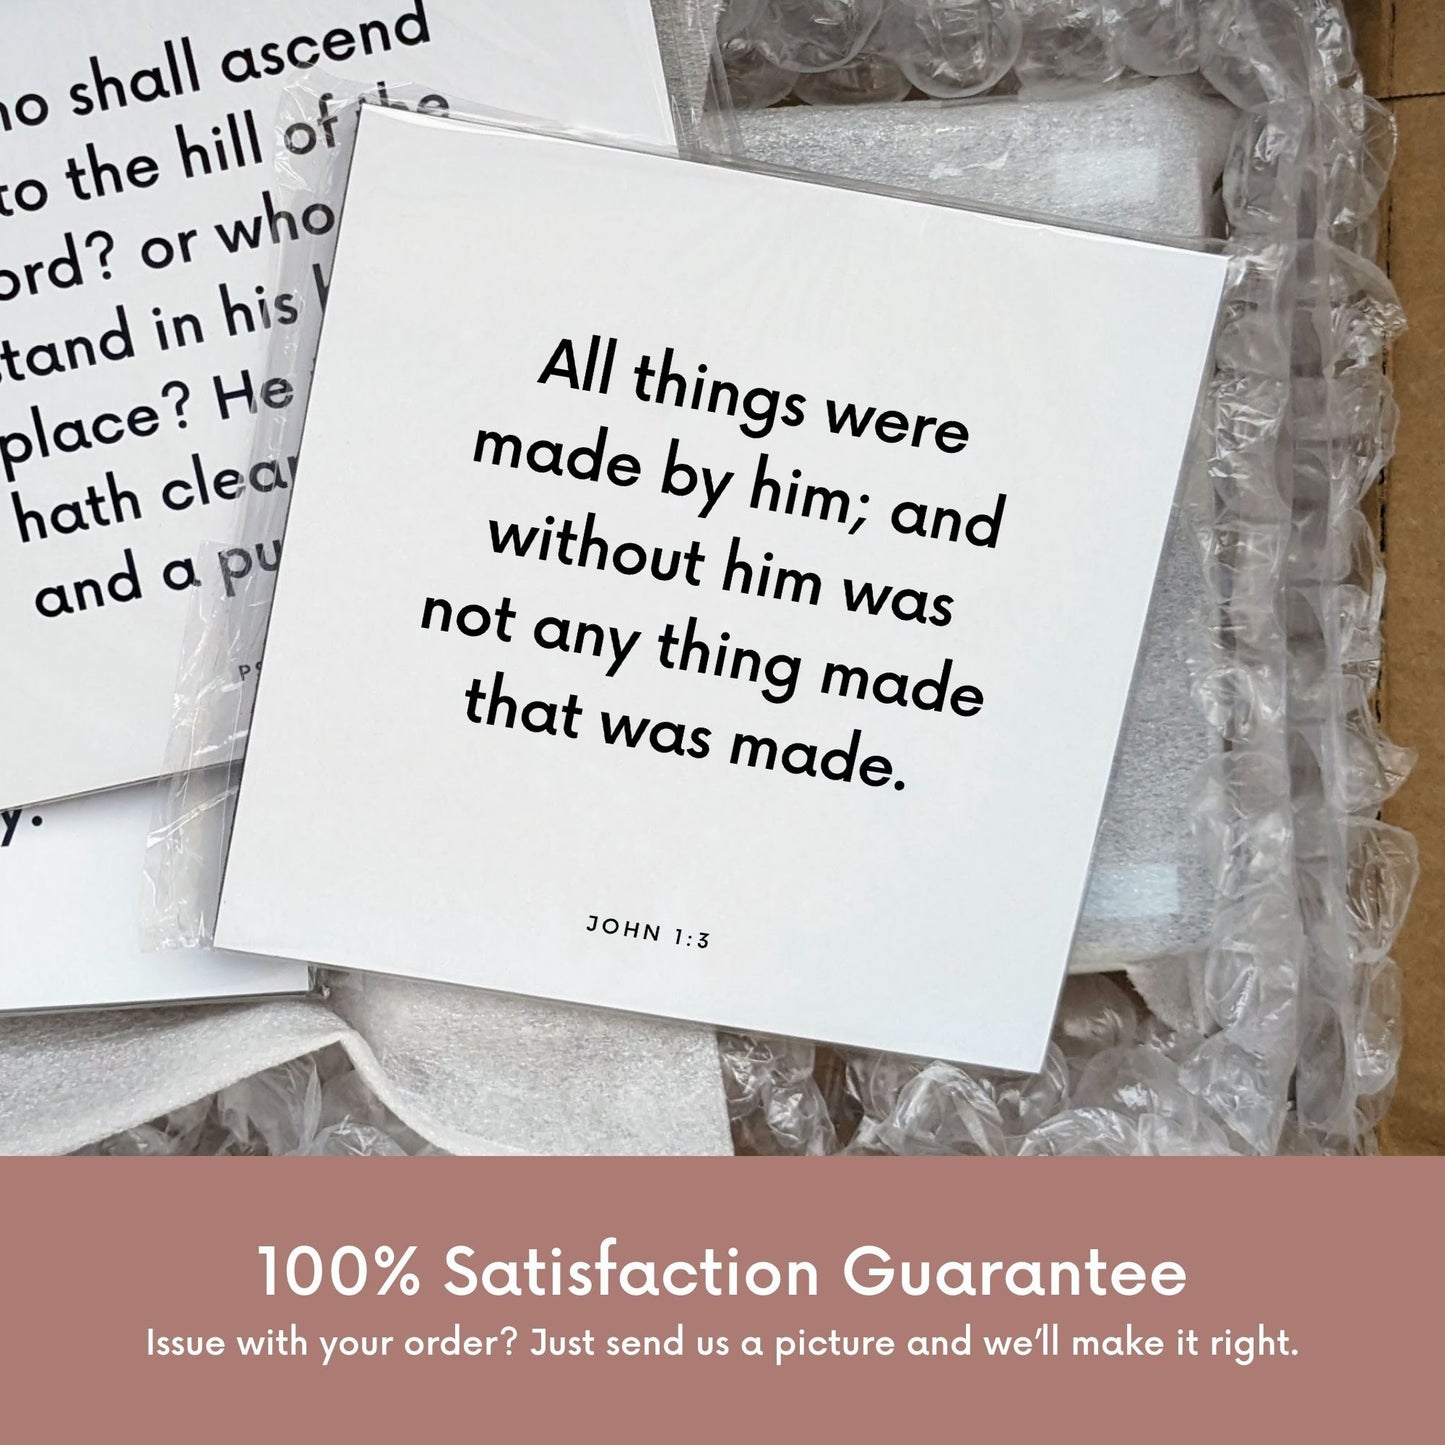 Shipping materials for scripture tile of John 1:3 - "All things were made by him"